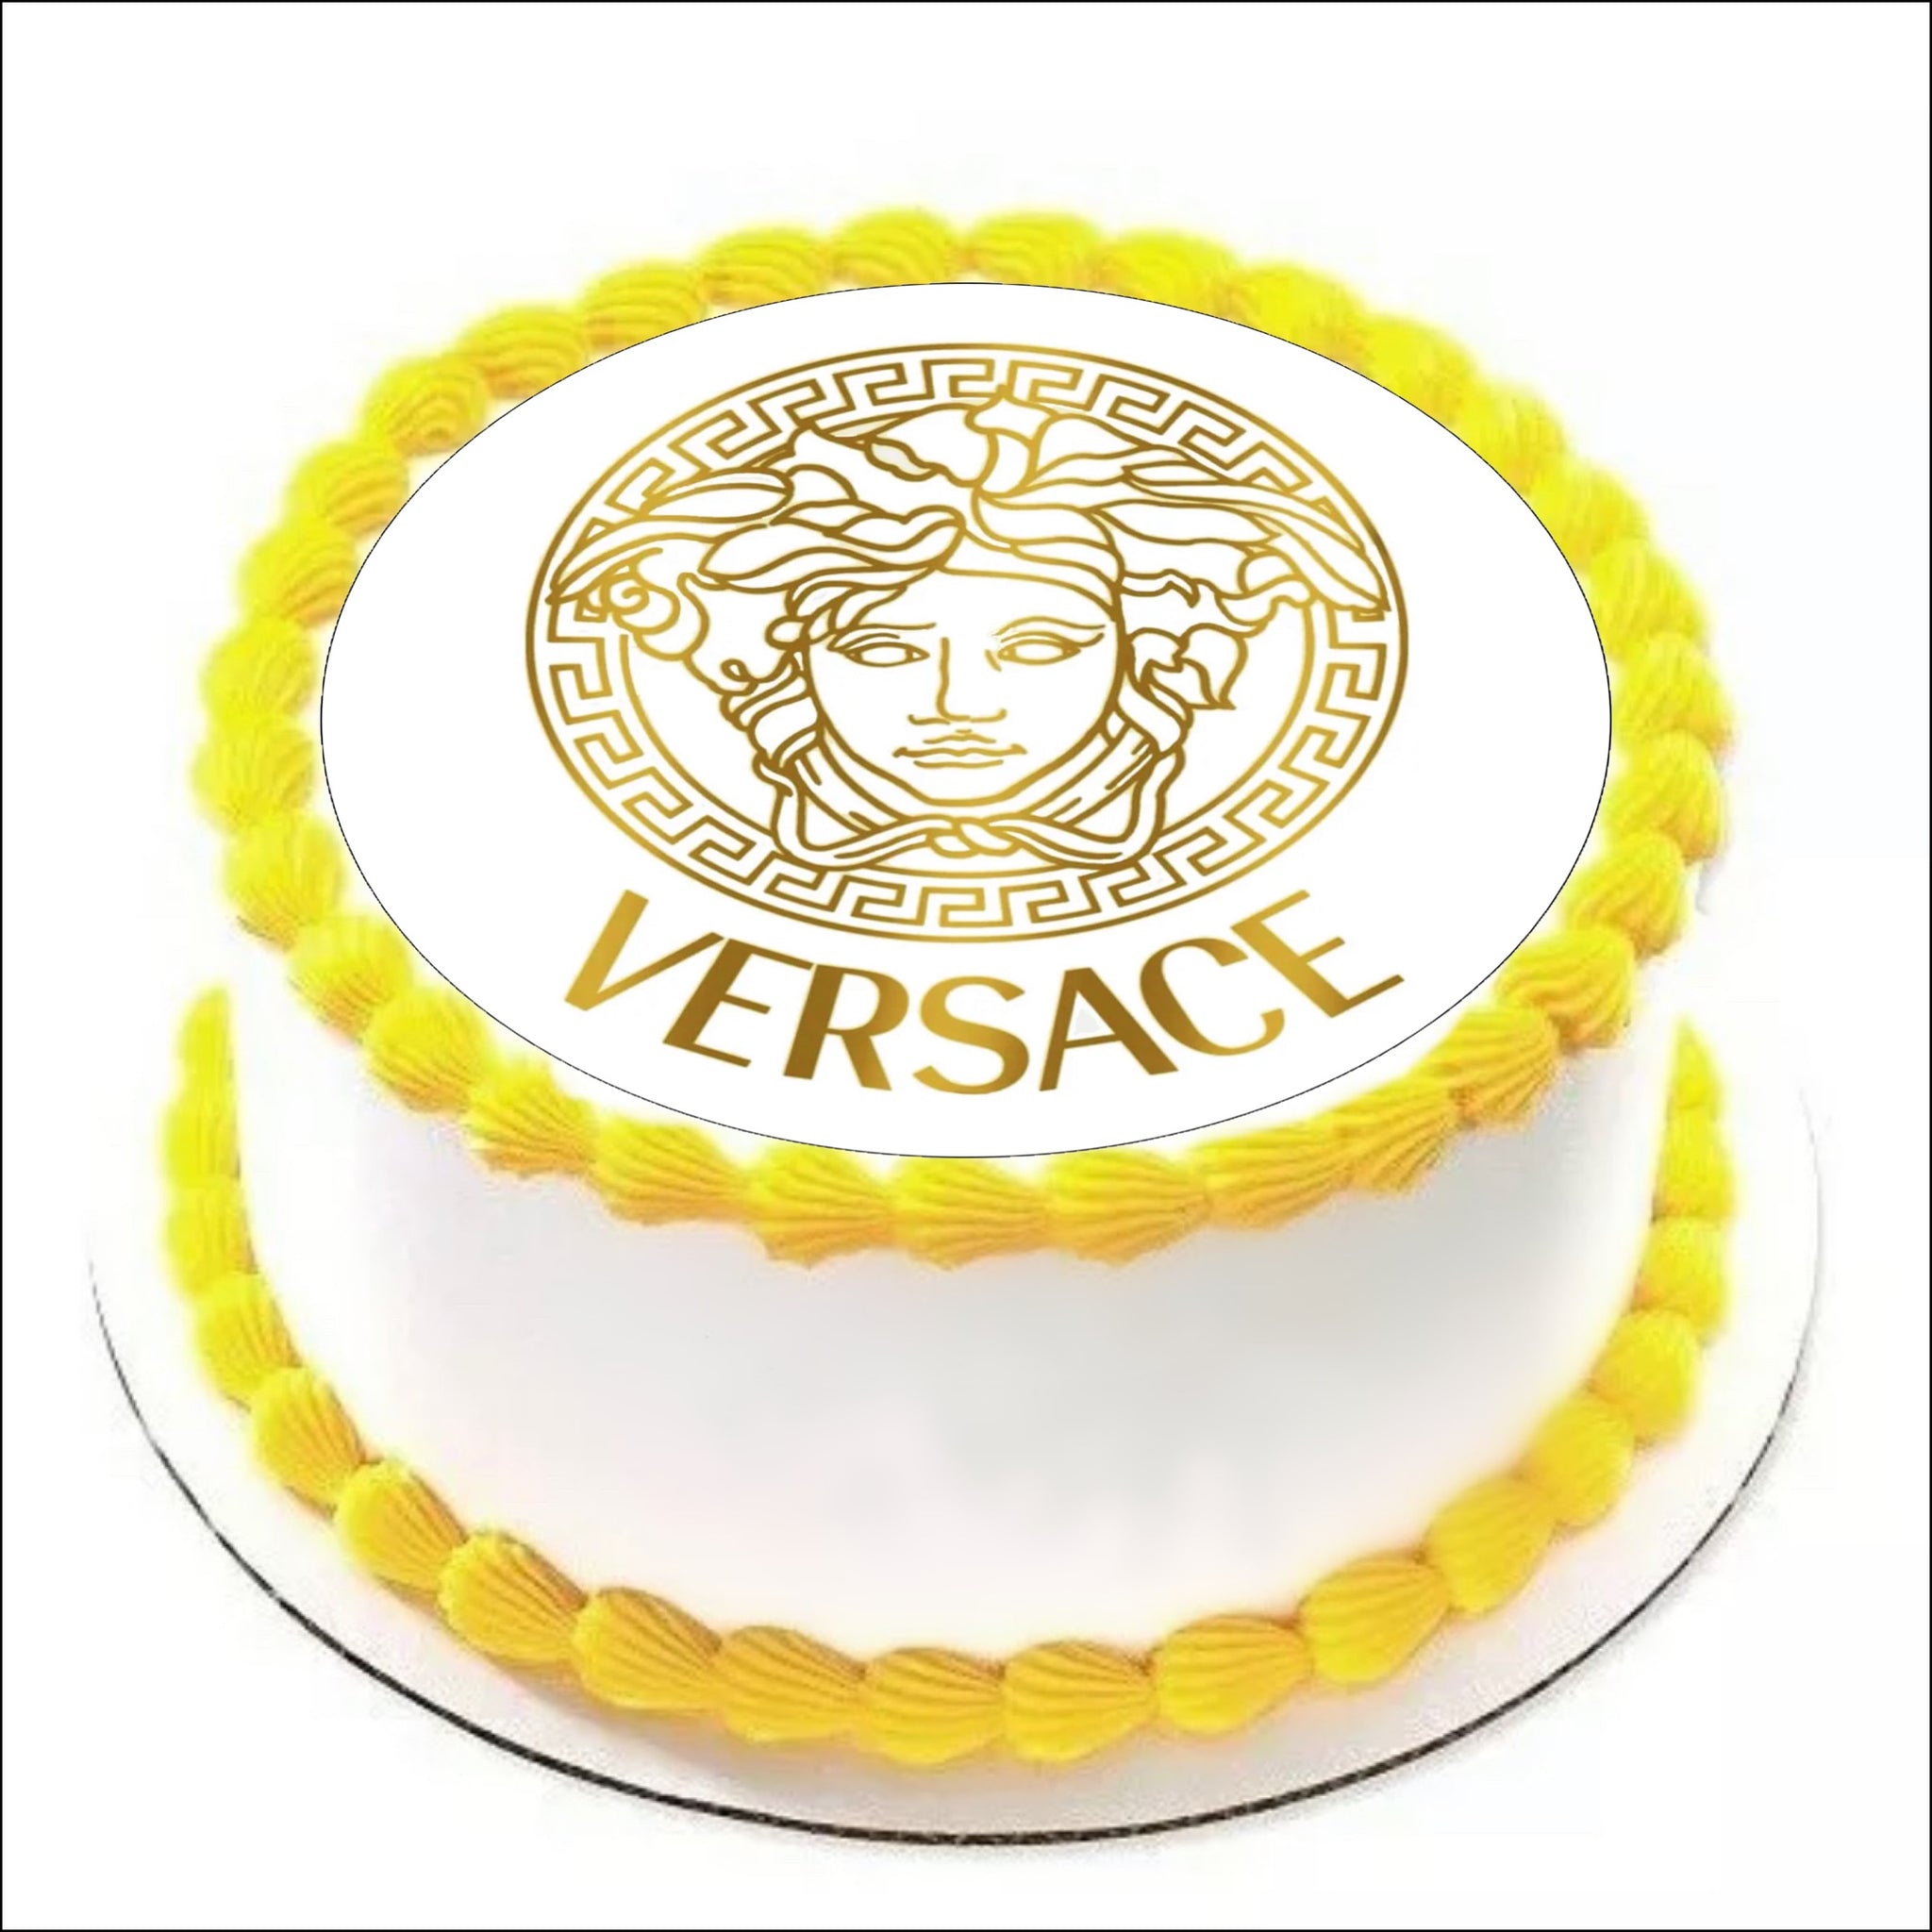 A Chanel/Versace cake? My brain is overloading with opinions on this... :  r/90DayFiance